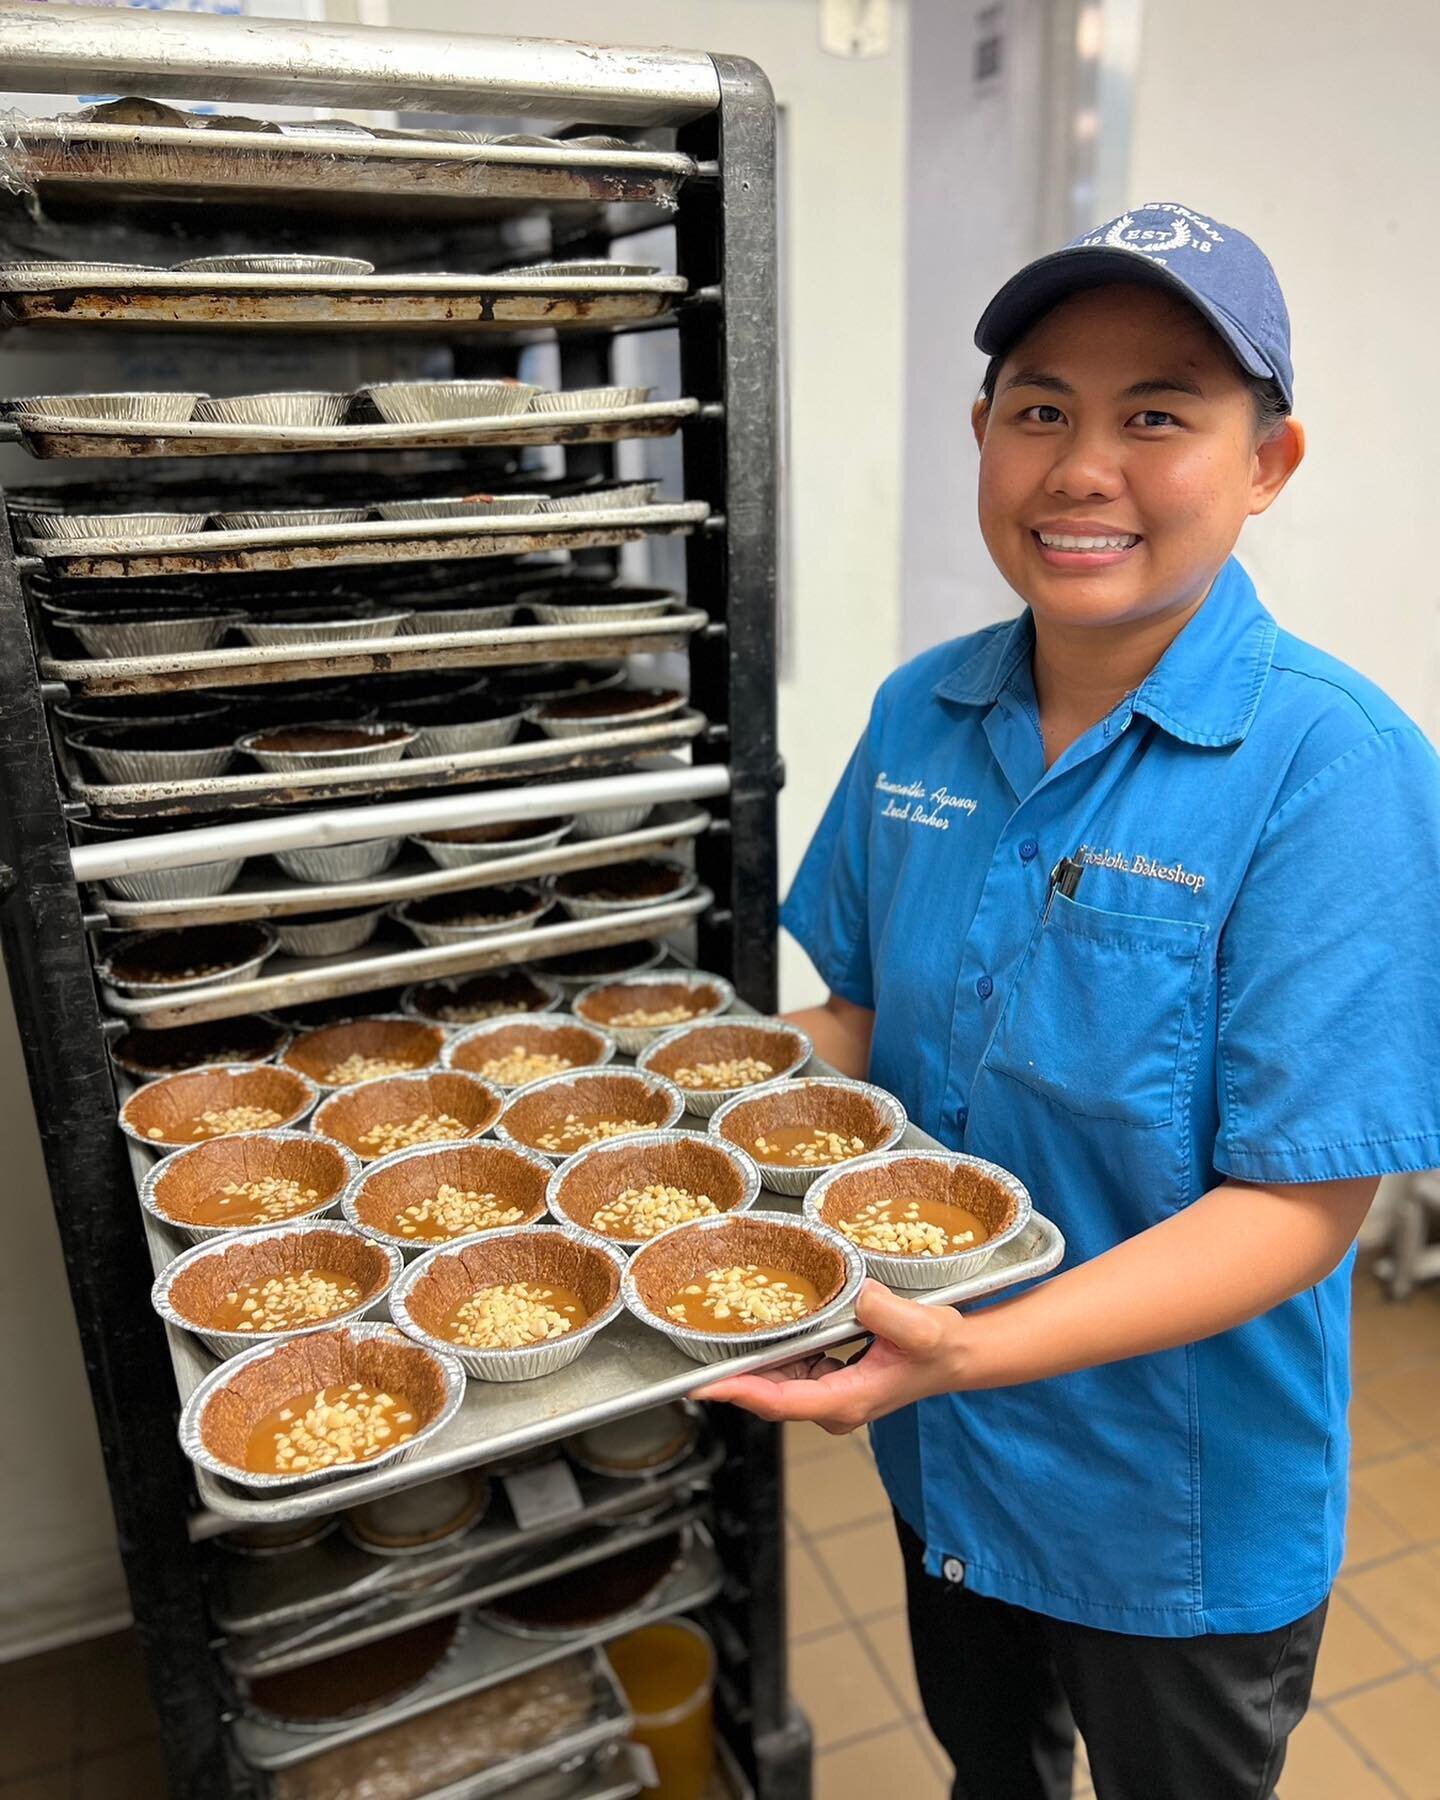 We&rsquo;d like to take a moment to recognize the amazing Samantha, head baker here at Leoda&rsquo;s and the Hoaloha Bakeshop. Sam is now in her 11th year with our company, she&rsquo;s an incredibly talented, artistic, hardworking, and crucial member